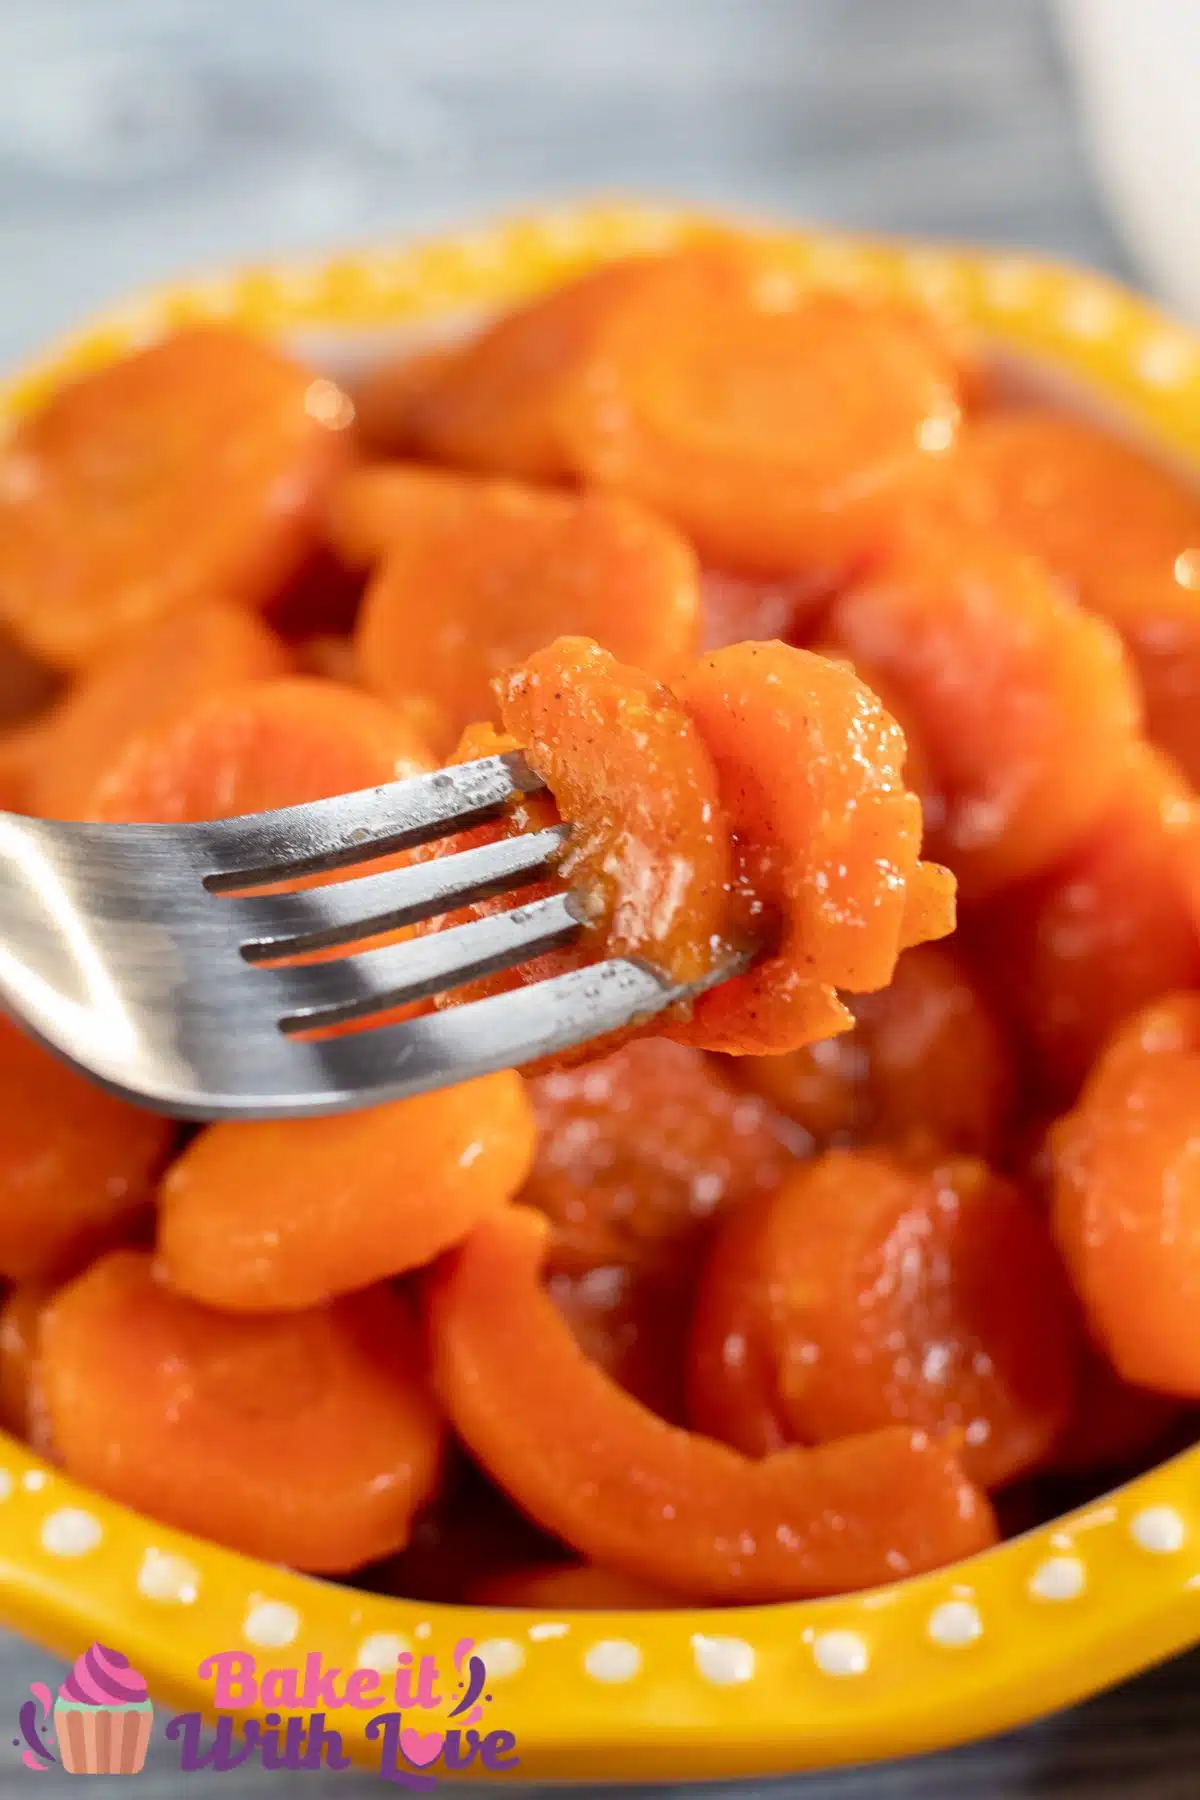 Tall image showing canned cooked carrots in a bowl.